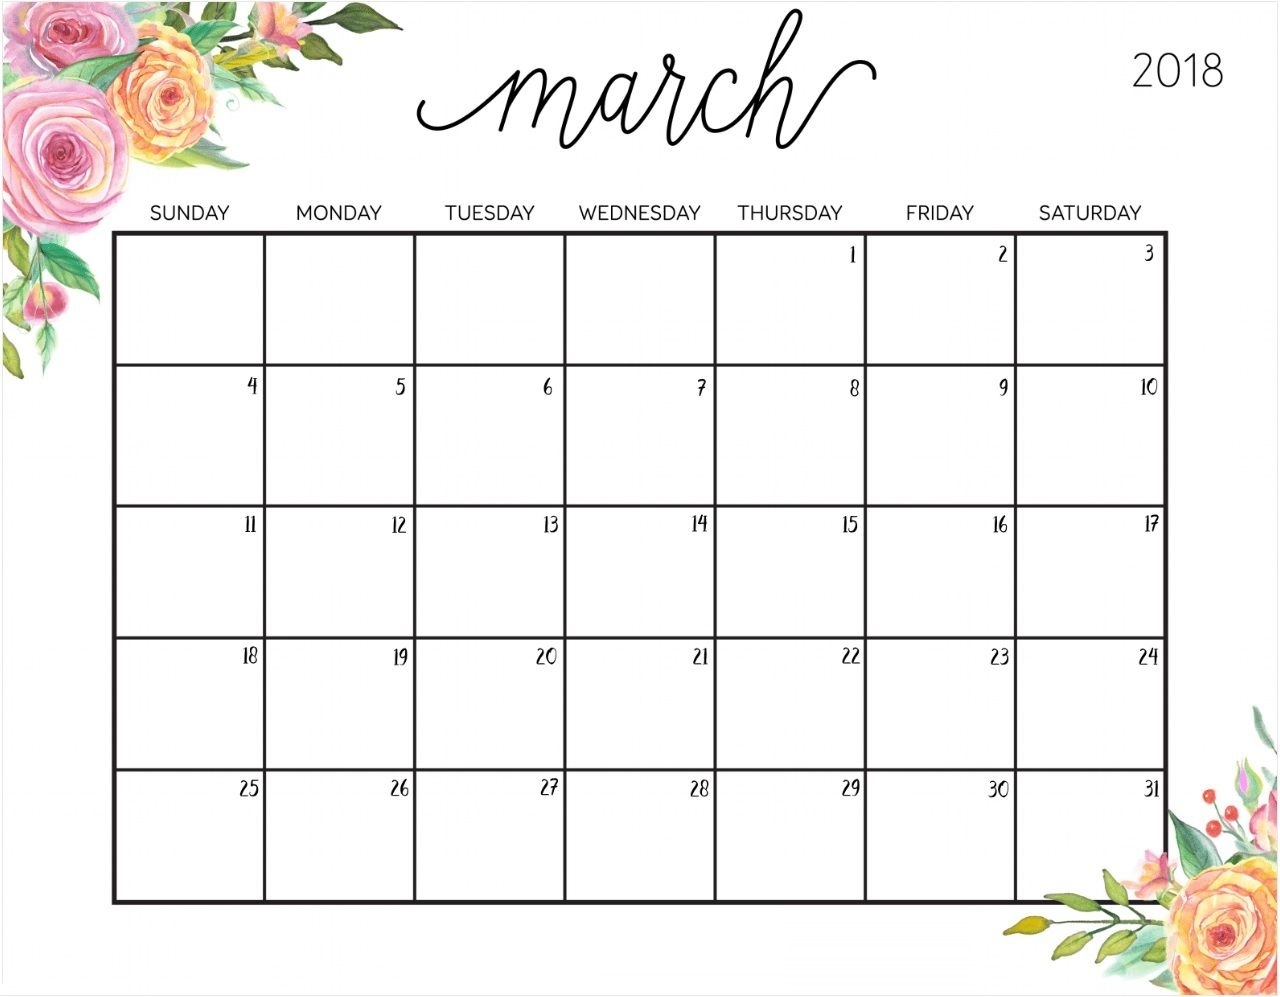 Floral March 2018 Philippines Calendar | Organisations | Pinterest  March Childrens Calendar Watercolor Png